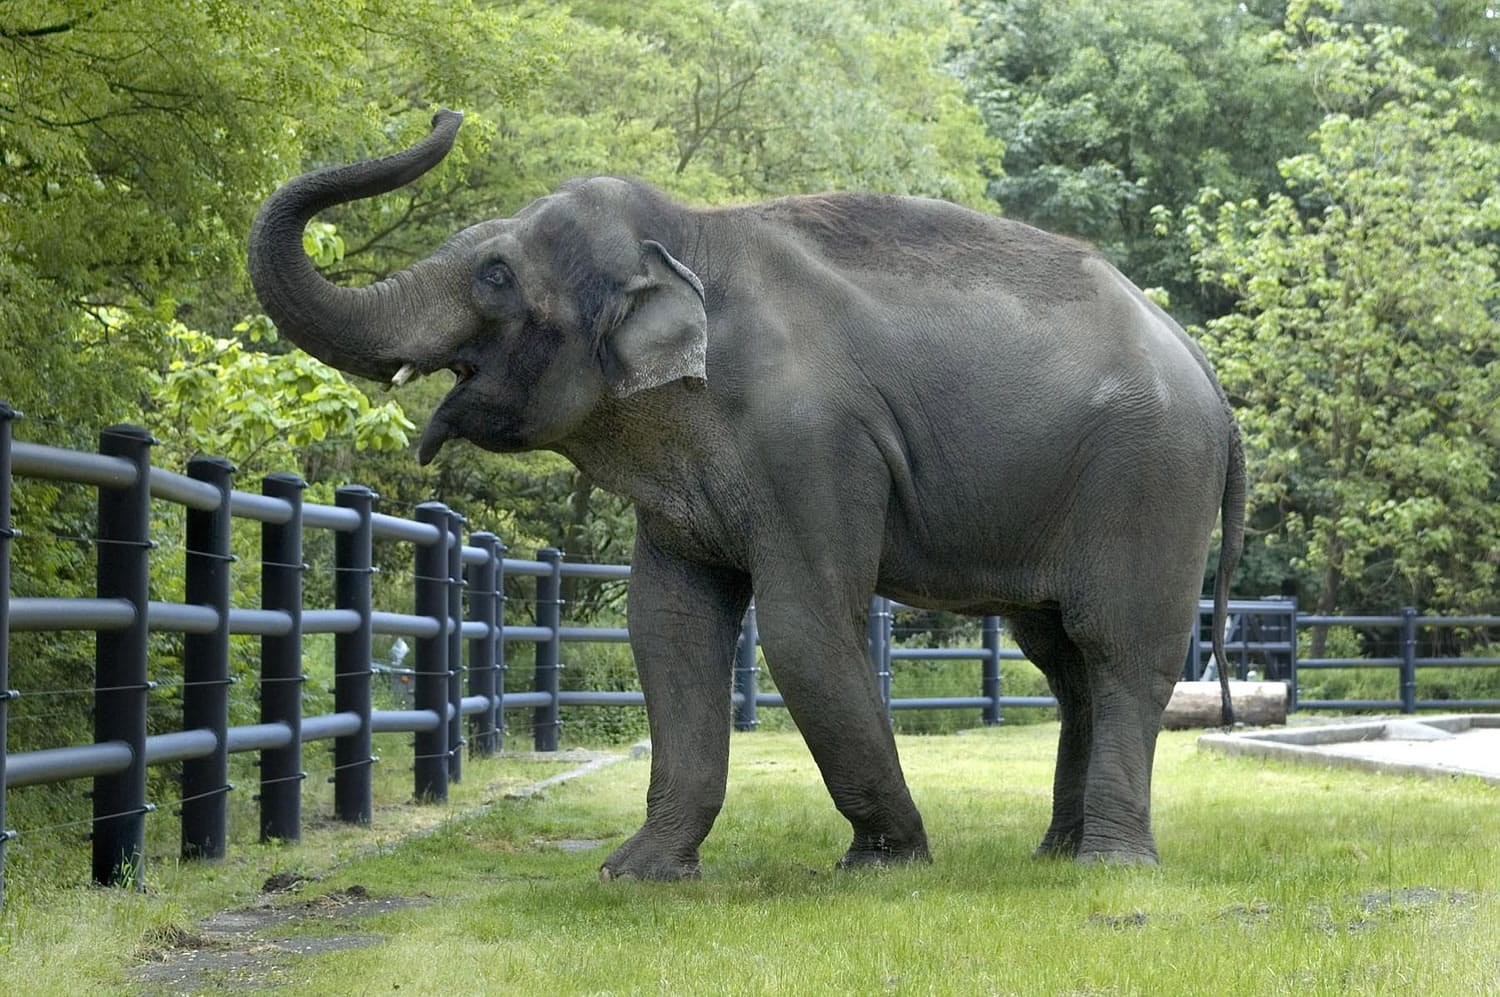 An elephant known as Rama walks at the Oregon Zoo in Portland, Ore. The Oregonian reports that Rama was euthanized Monday.